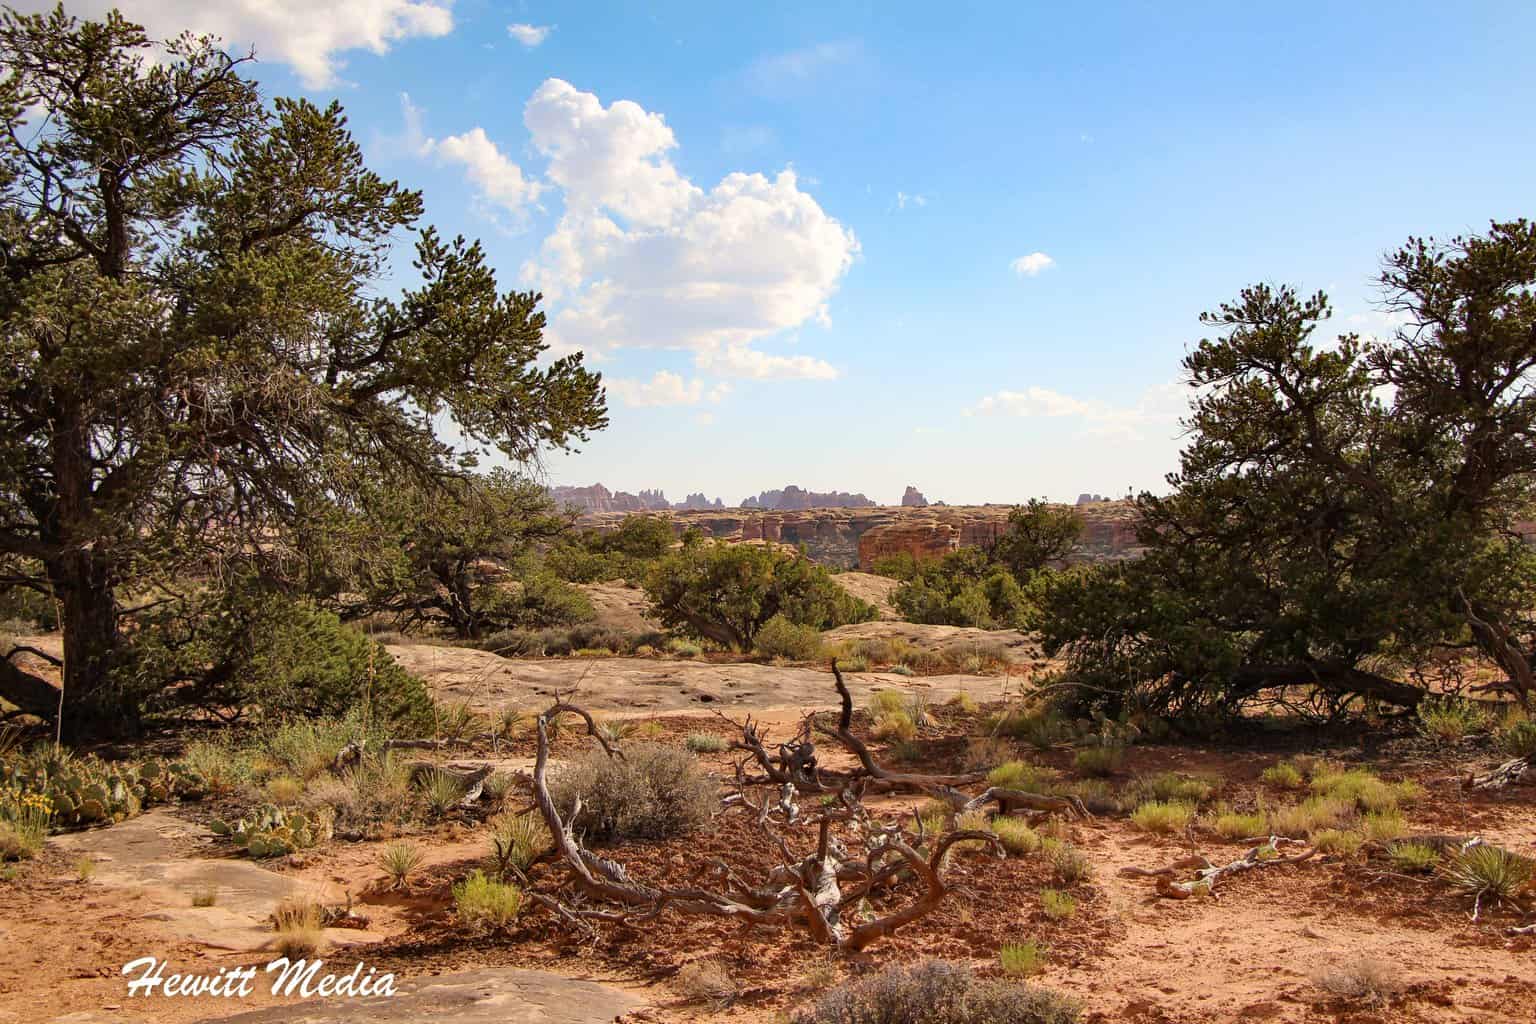 Canyonlands National Park Guide